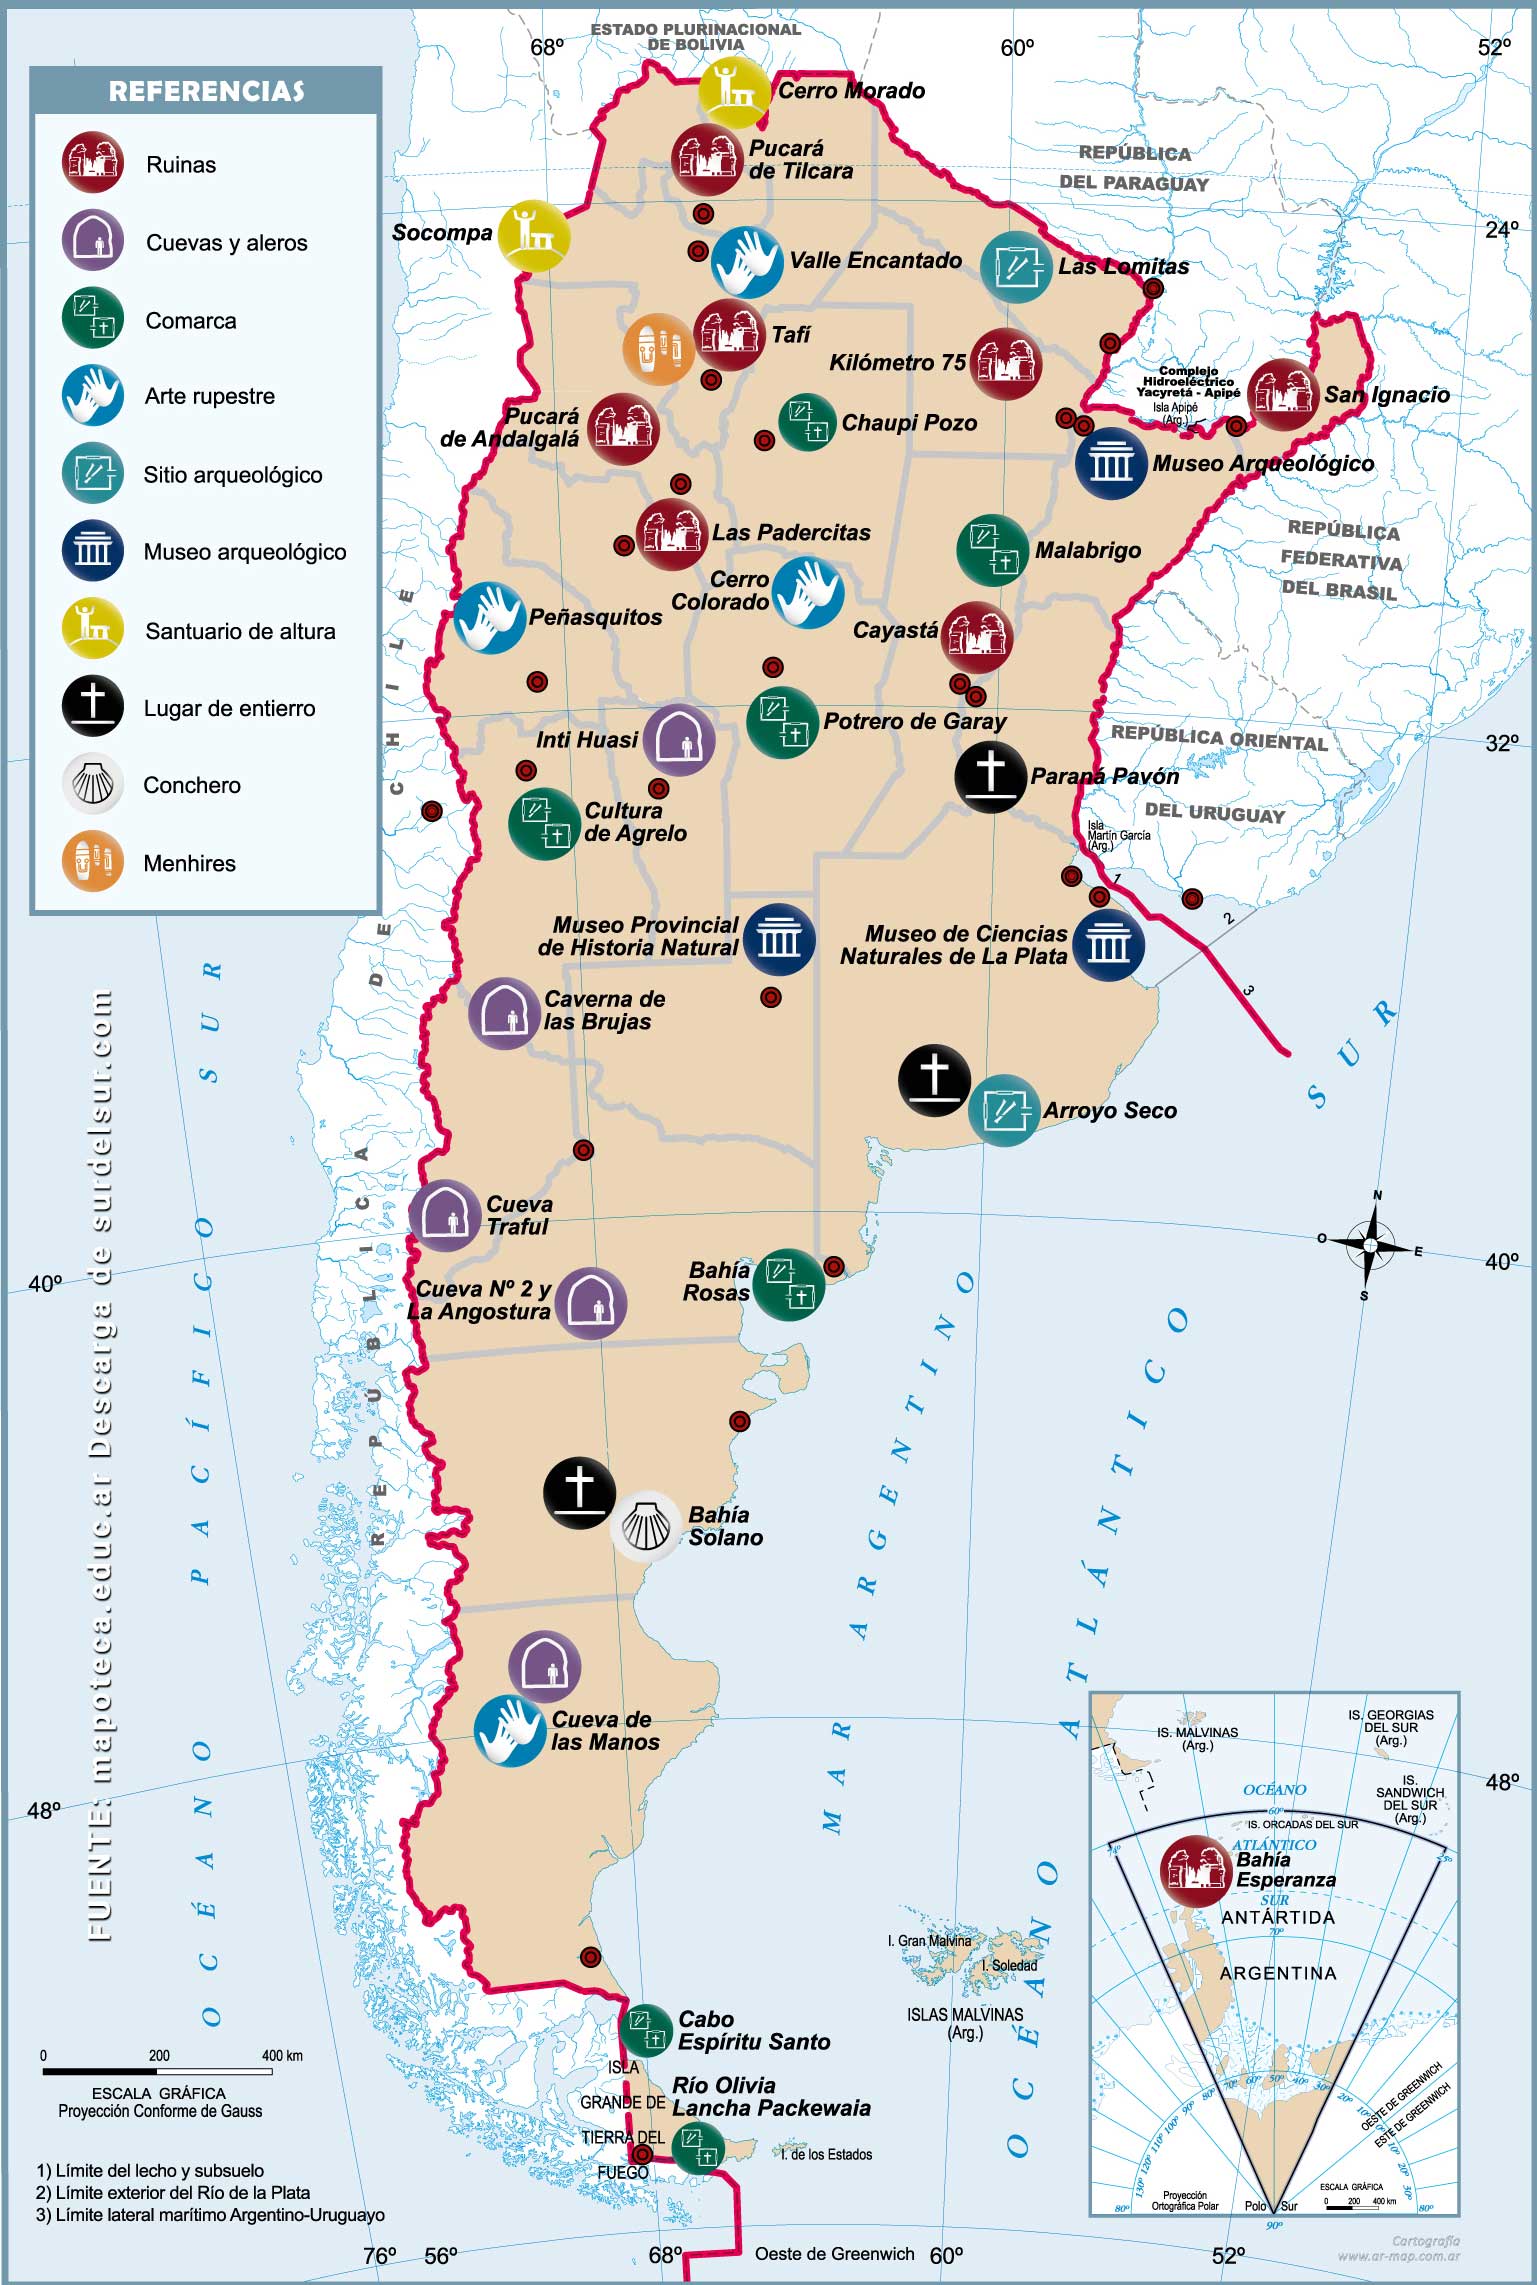 Archaeological map with main archaeological sites of Argentina